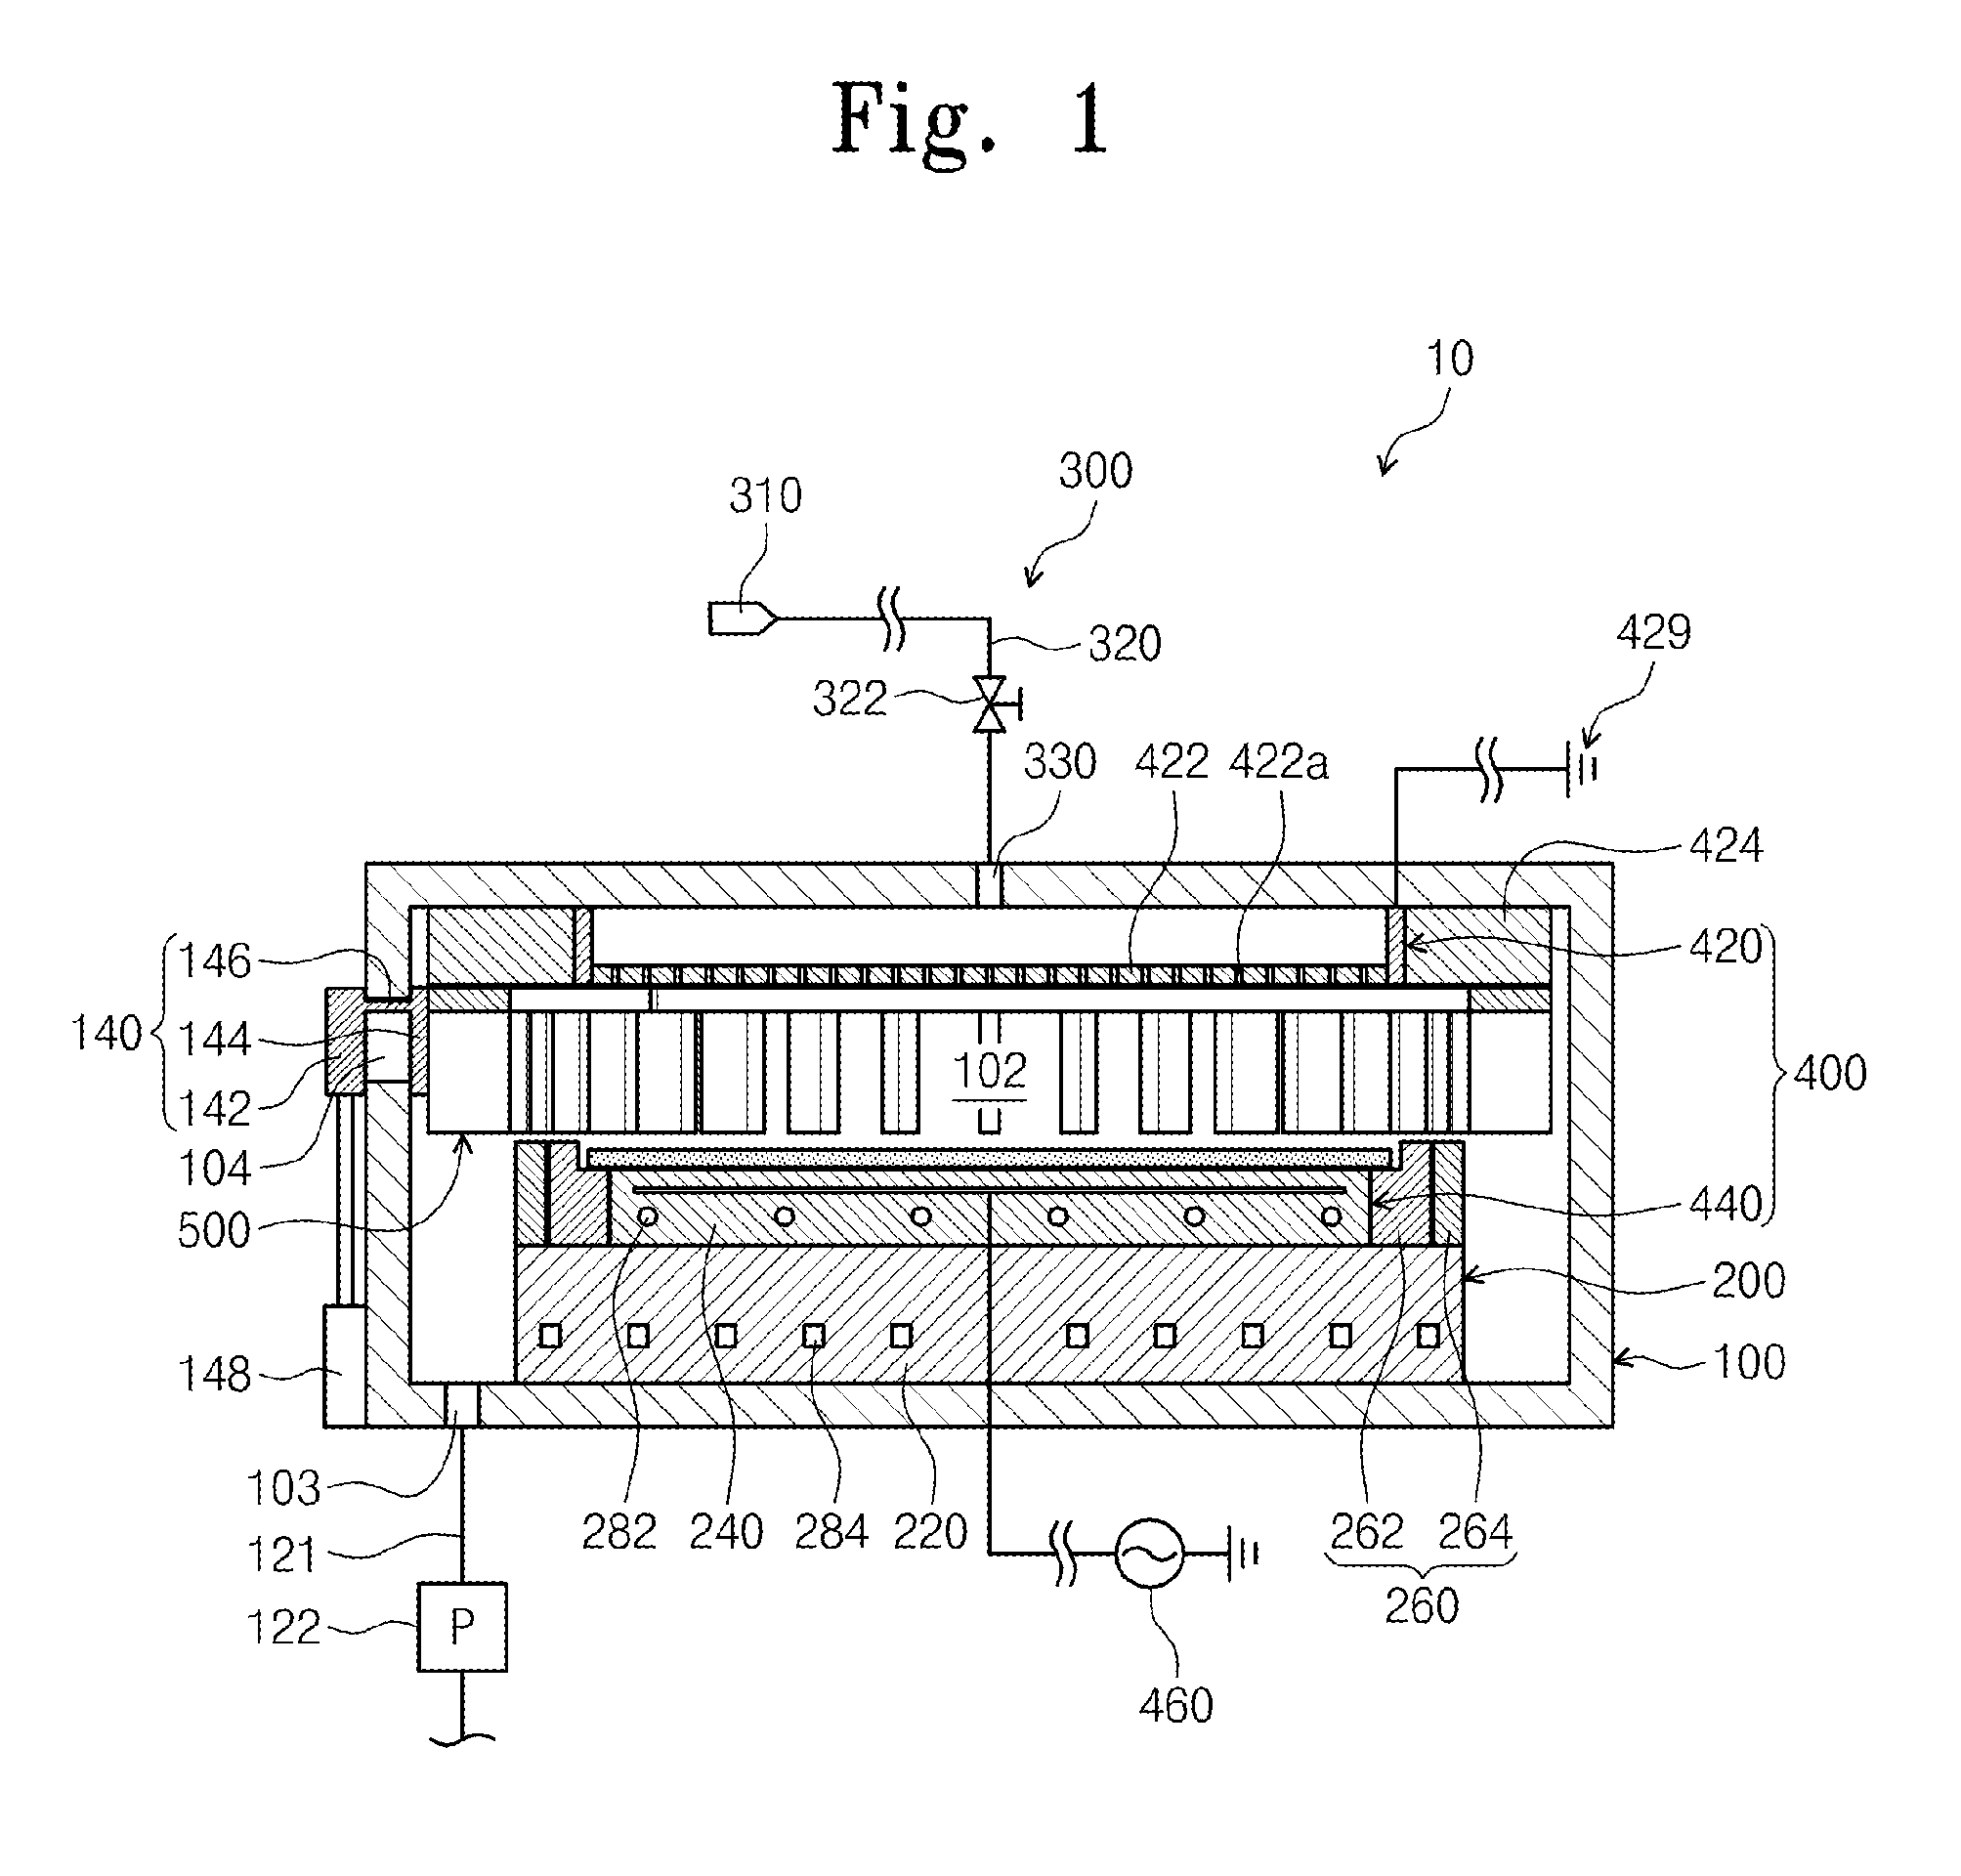 Plasma boundary limiter unit and apparatus for treating substrate